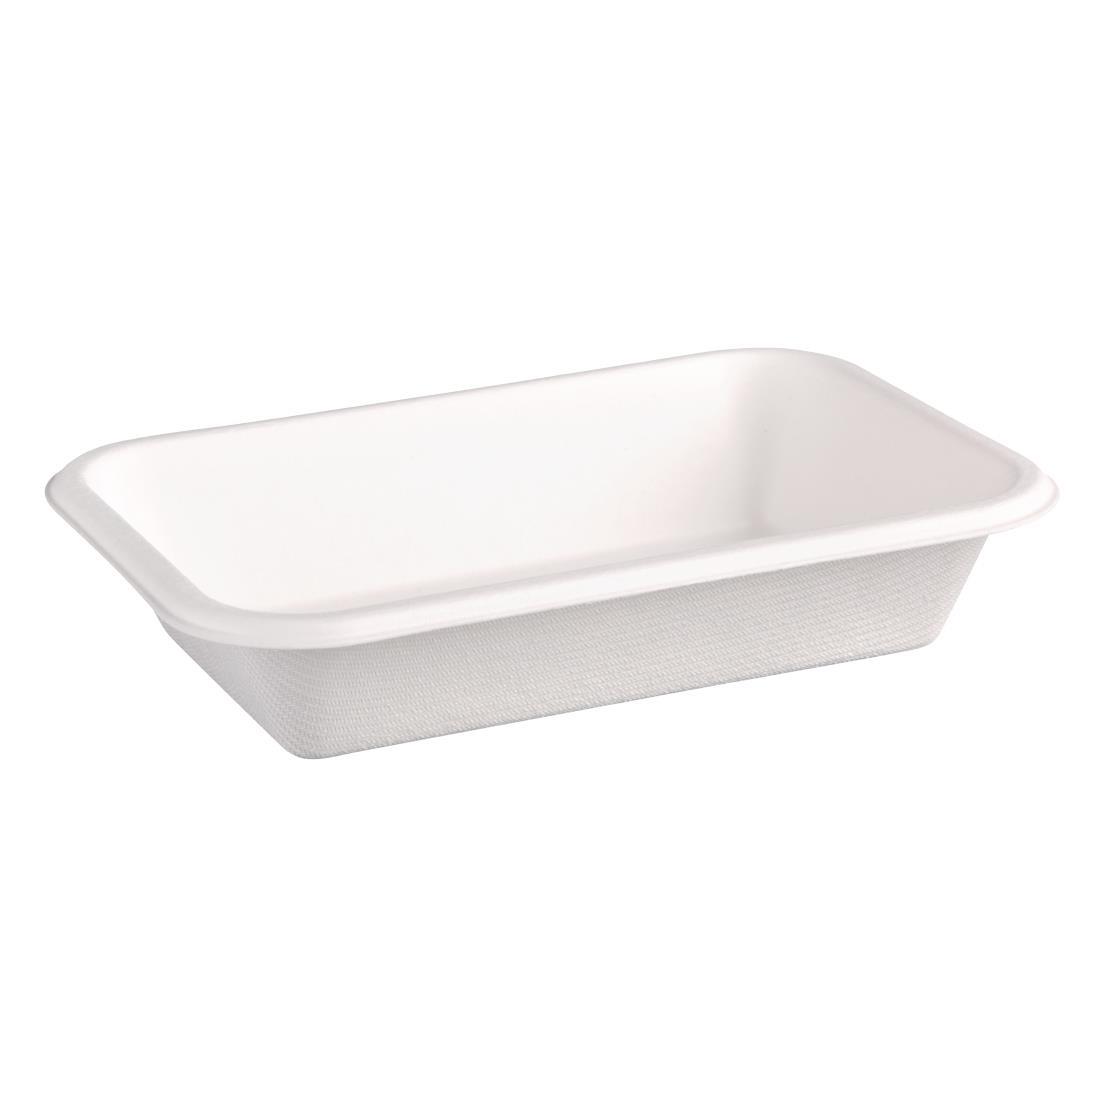 Fiesta Compostable Bagasse Food Trays 16oz (Pack of 50) - DW347  - 2